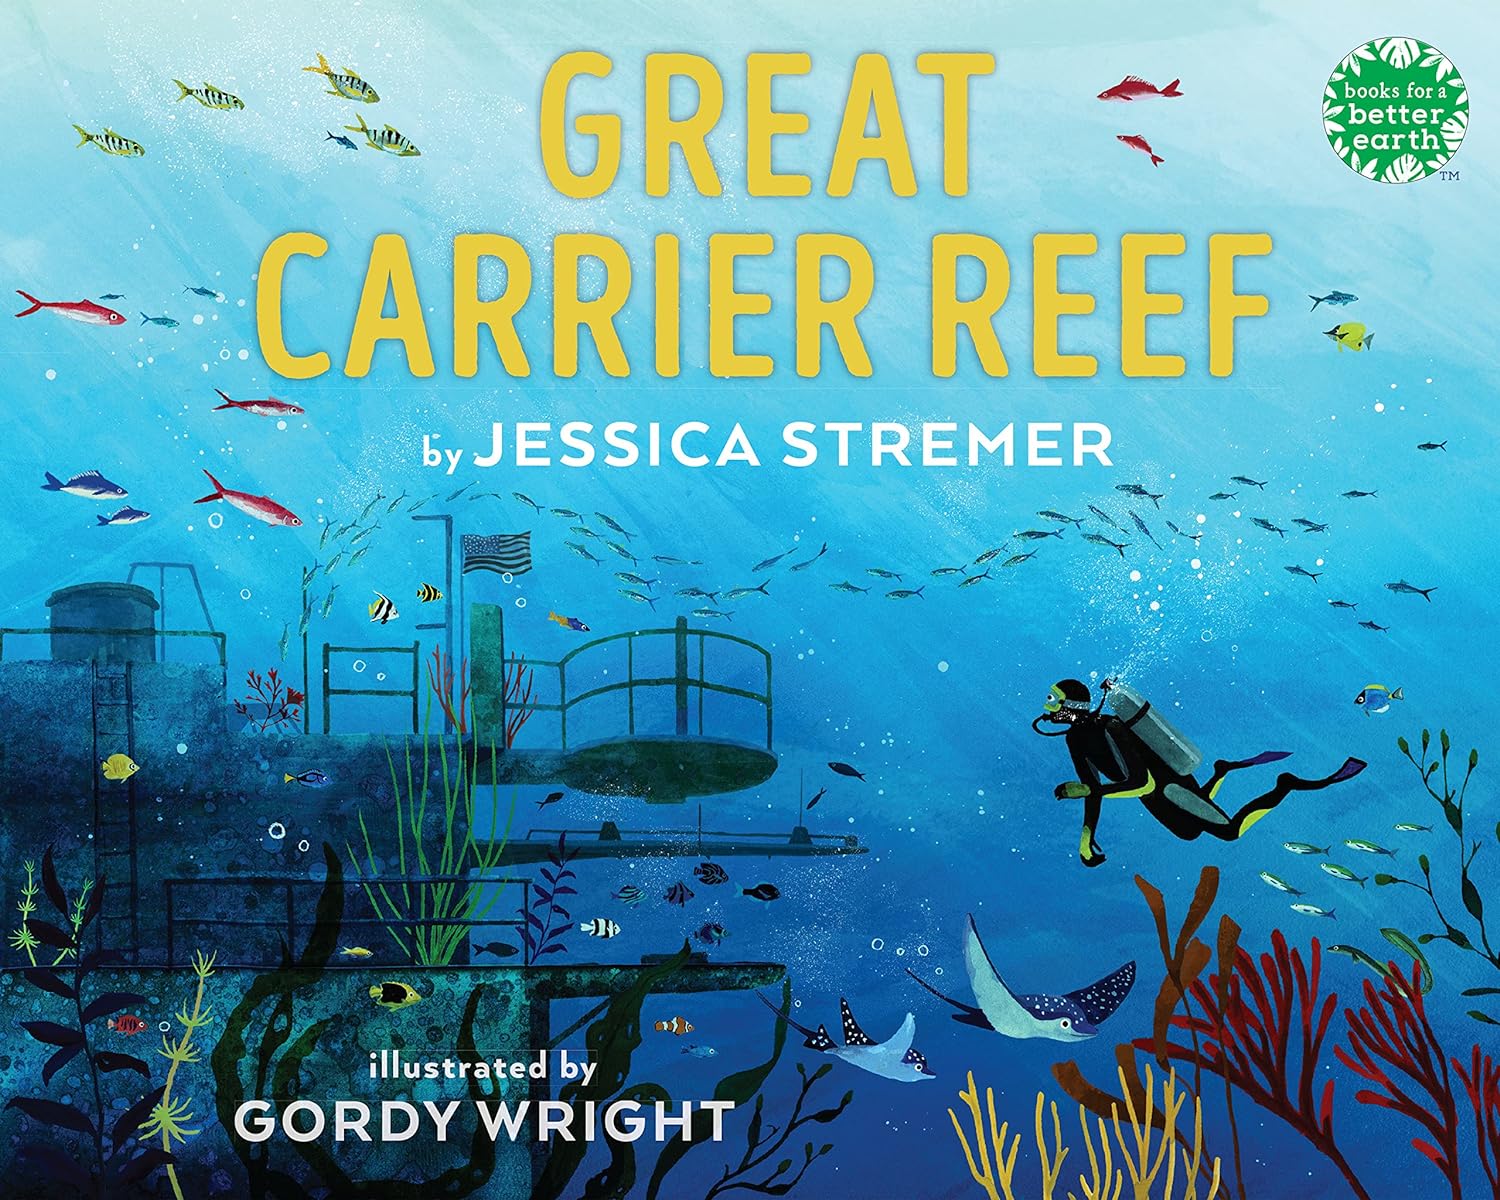 Great Carrier Reef by Jessica Stremer. A scuba diver underwater in the ocean